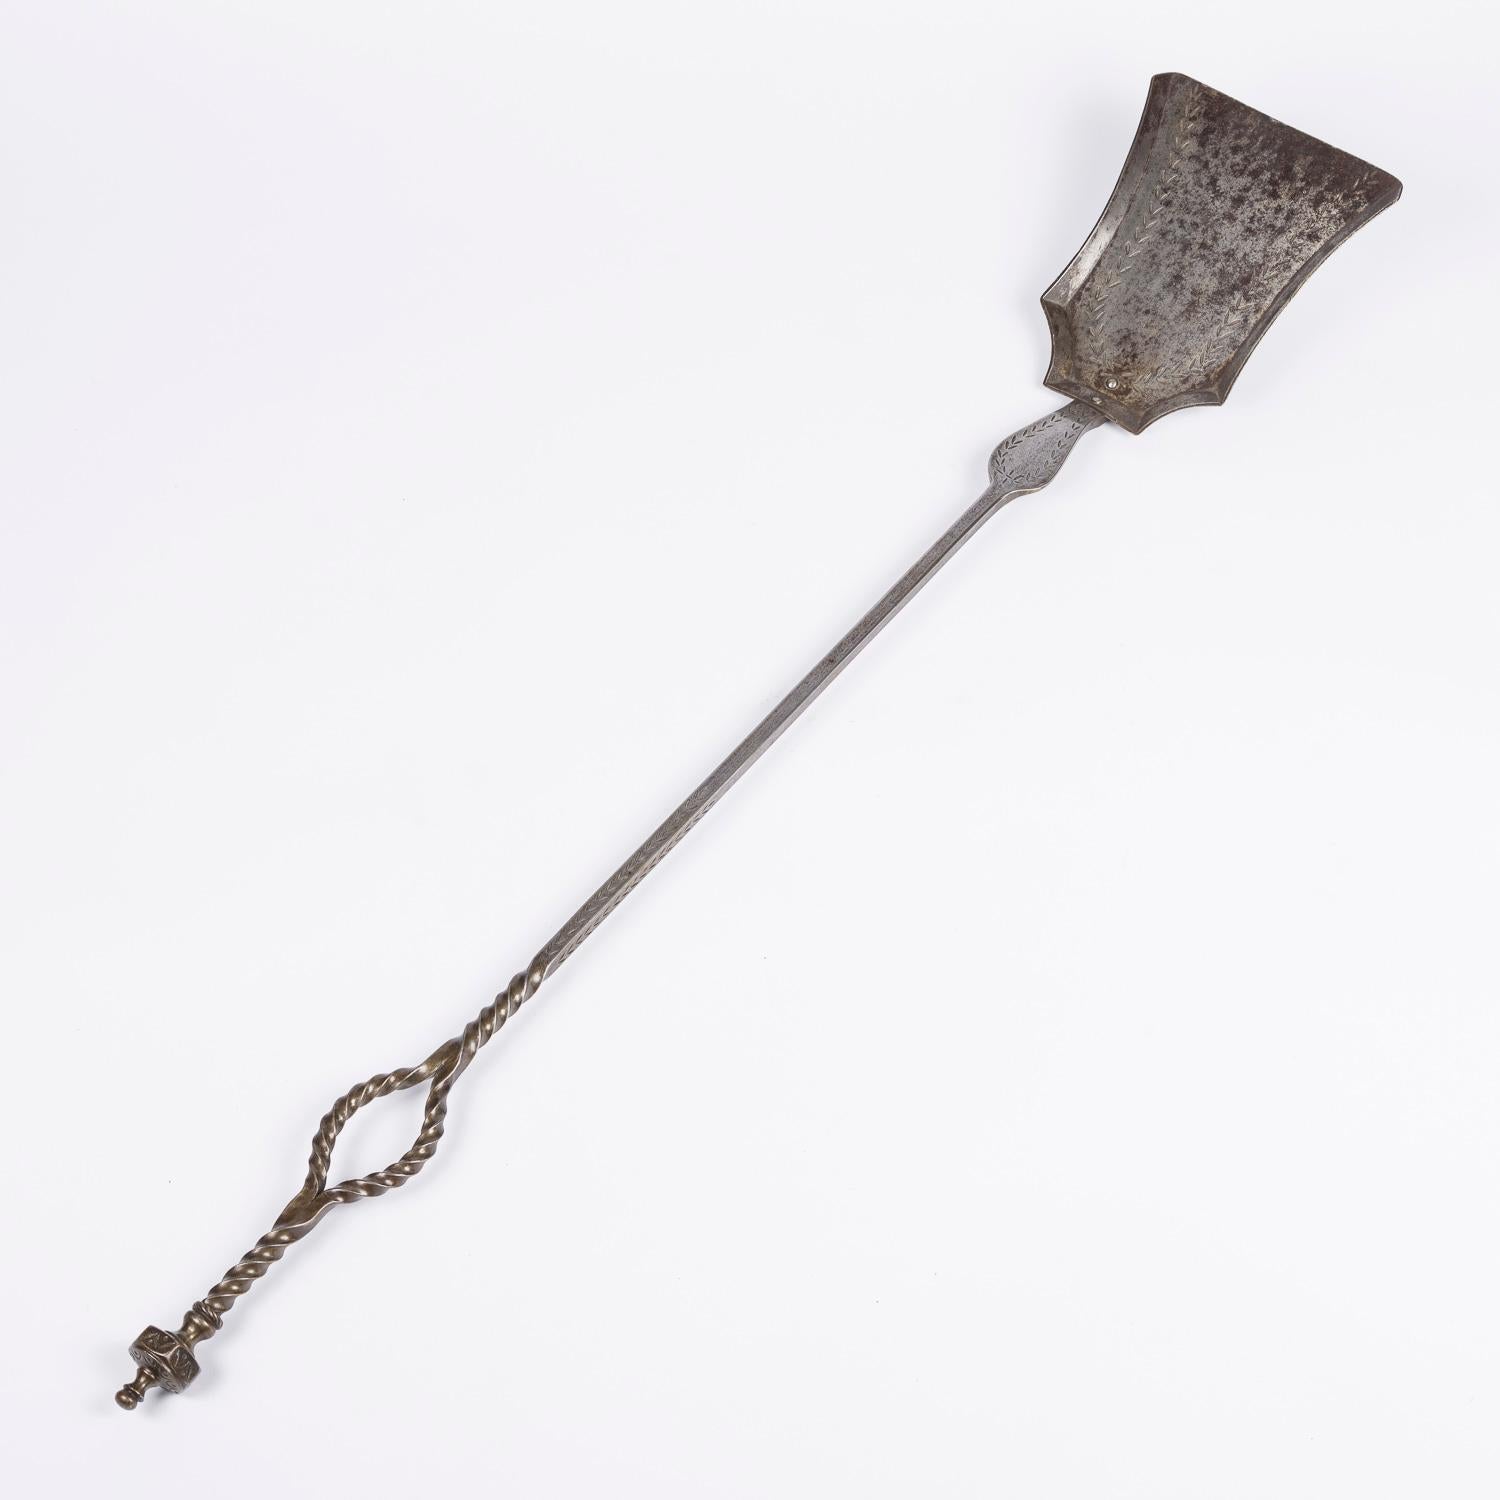 A set of French late 19th century wrought iron fire tools, comprising of a shovel and tongs.

Length of tongs: 39 inches - 99 cm.

length of shovel: 38 1/2 inches - 98 cm.